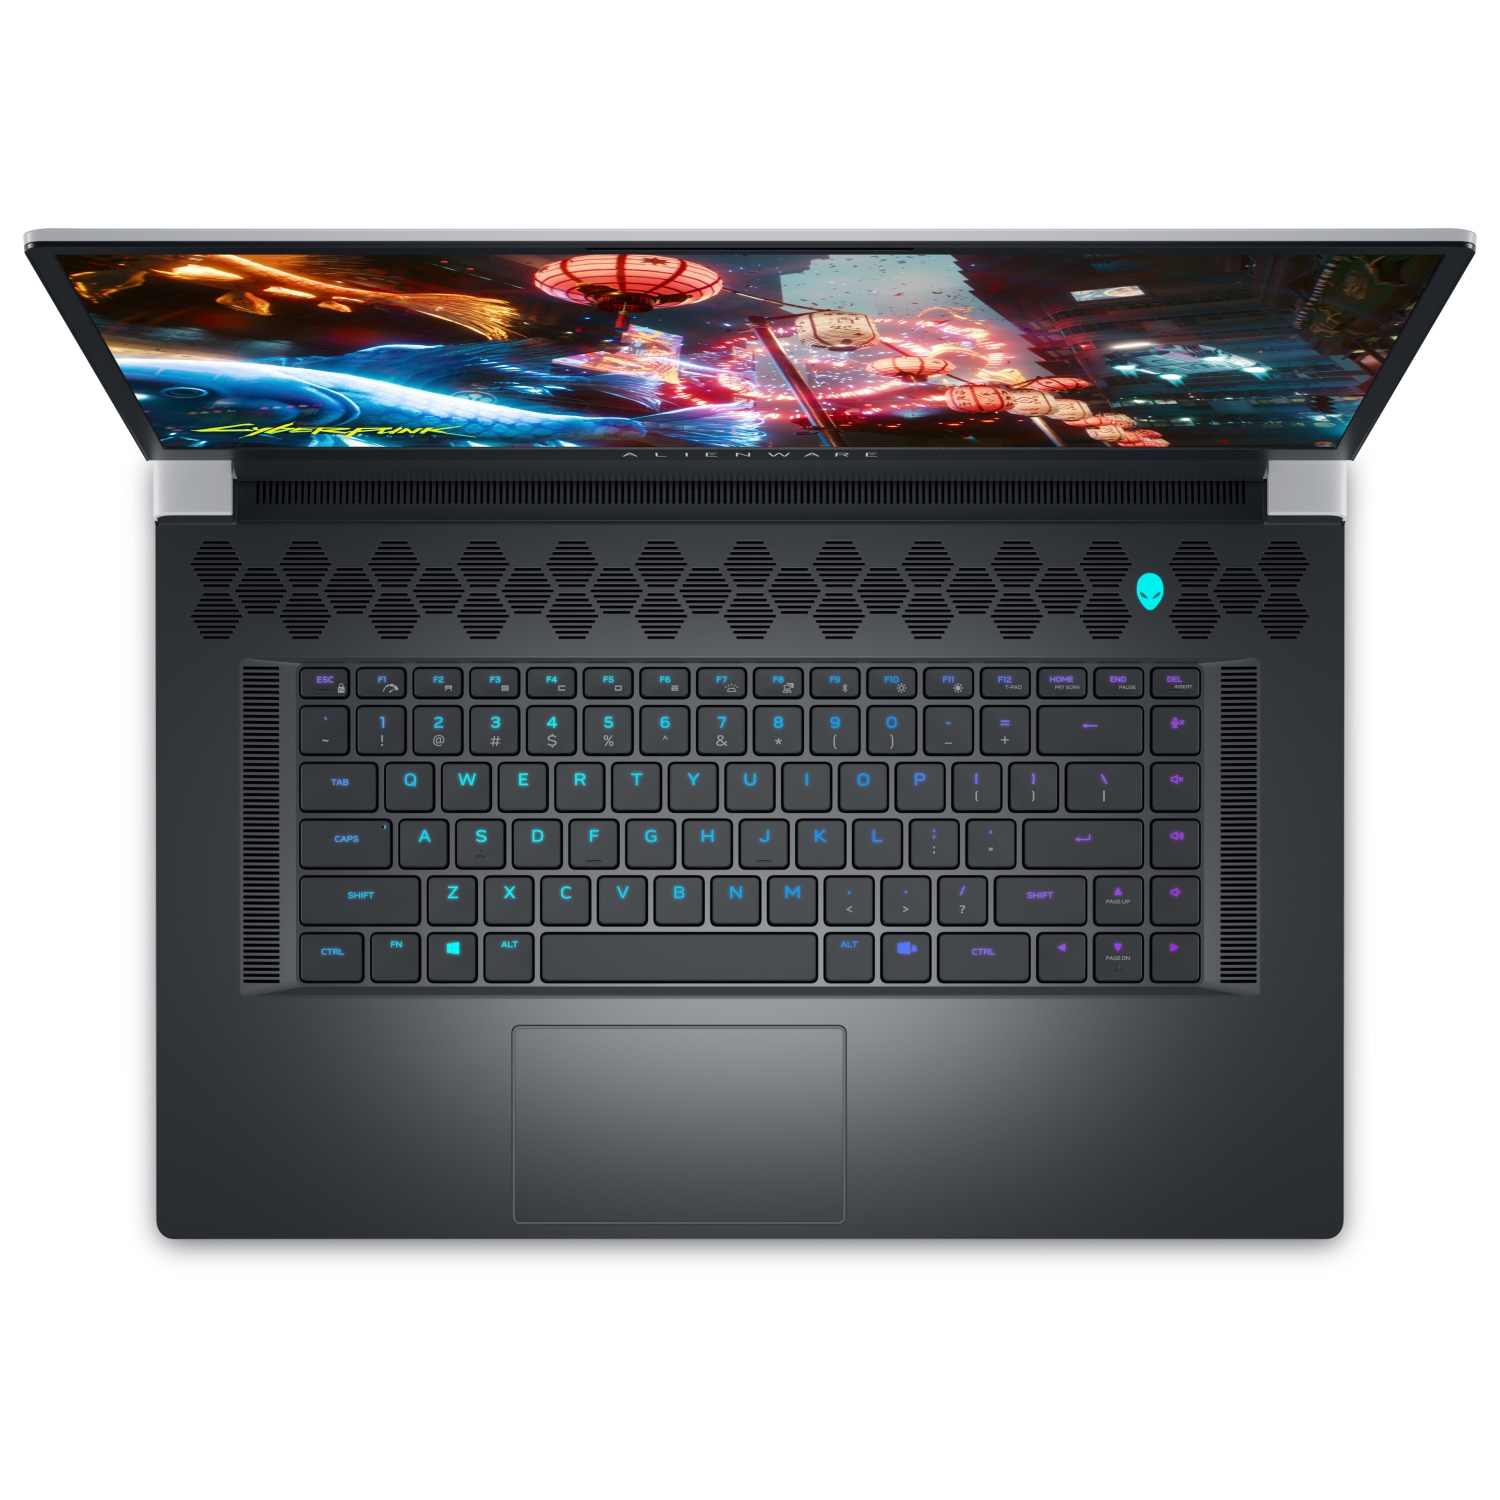 Refurbished (Excellent) – Dell Alienware X17 R2 Gaming Laptop (2022) | 17.3" FHD | Core i9 - 512GB SSD - 16GB RAM - 3070 Ti | 14 Cores @ 5 GHz - 12th Gen CPU - 8GB GDDR6X